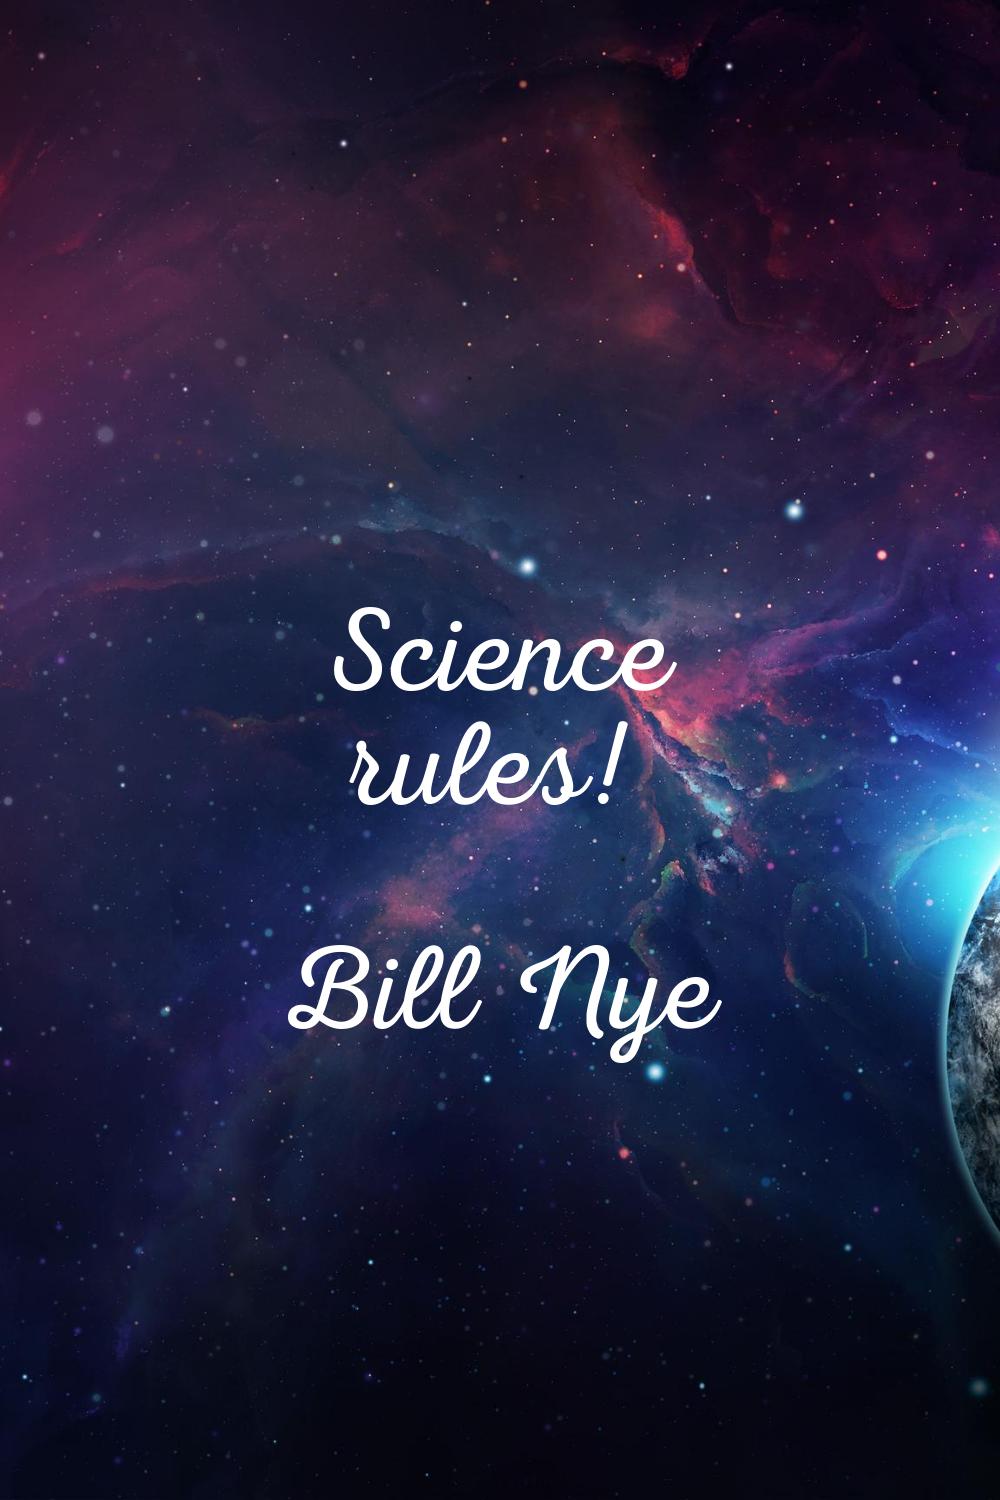 Science rules!